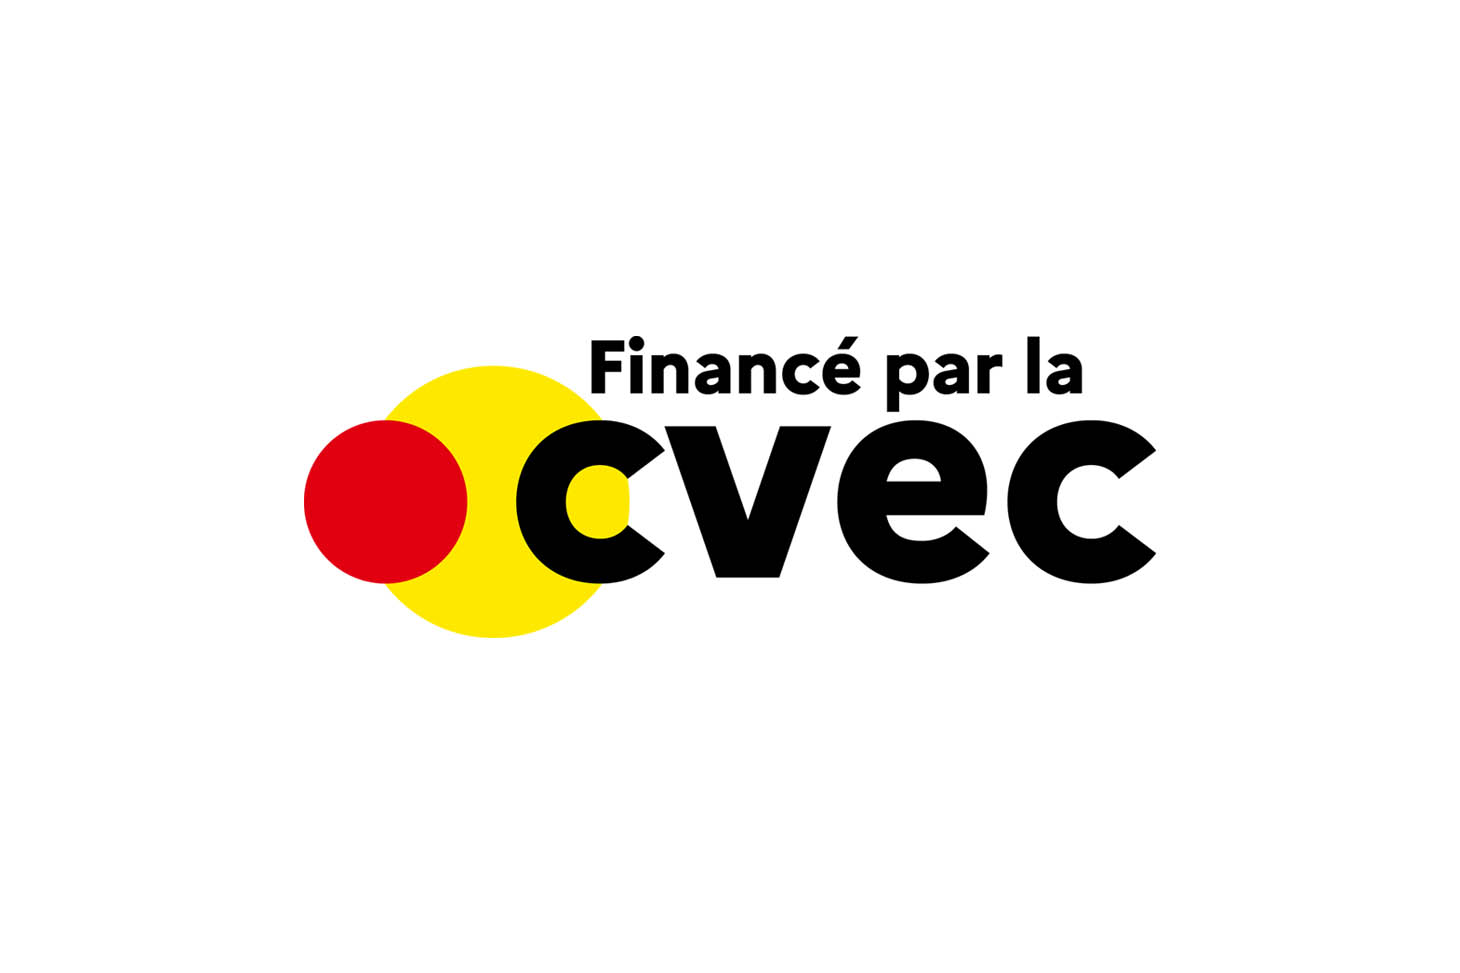 Funded by CEVEC